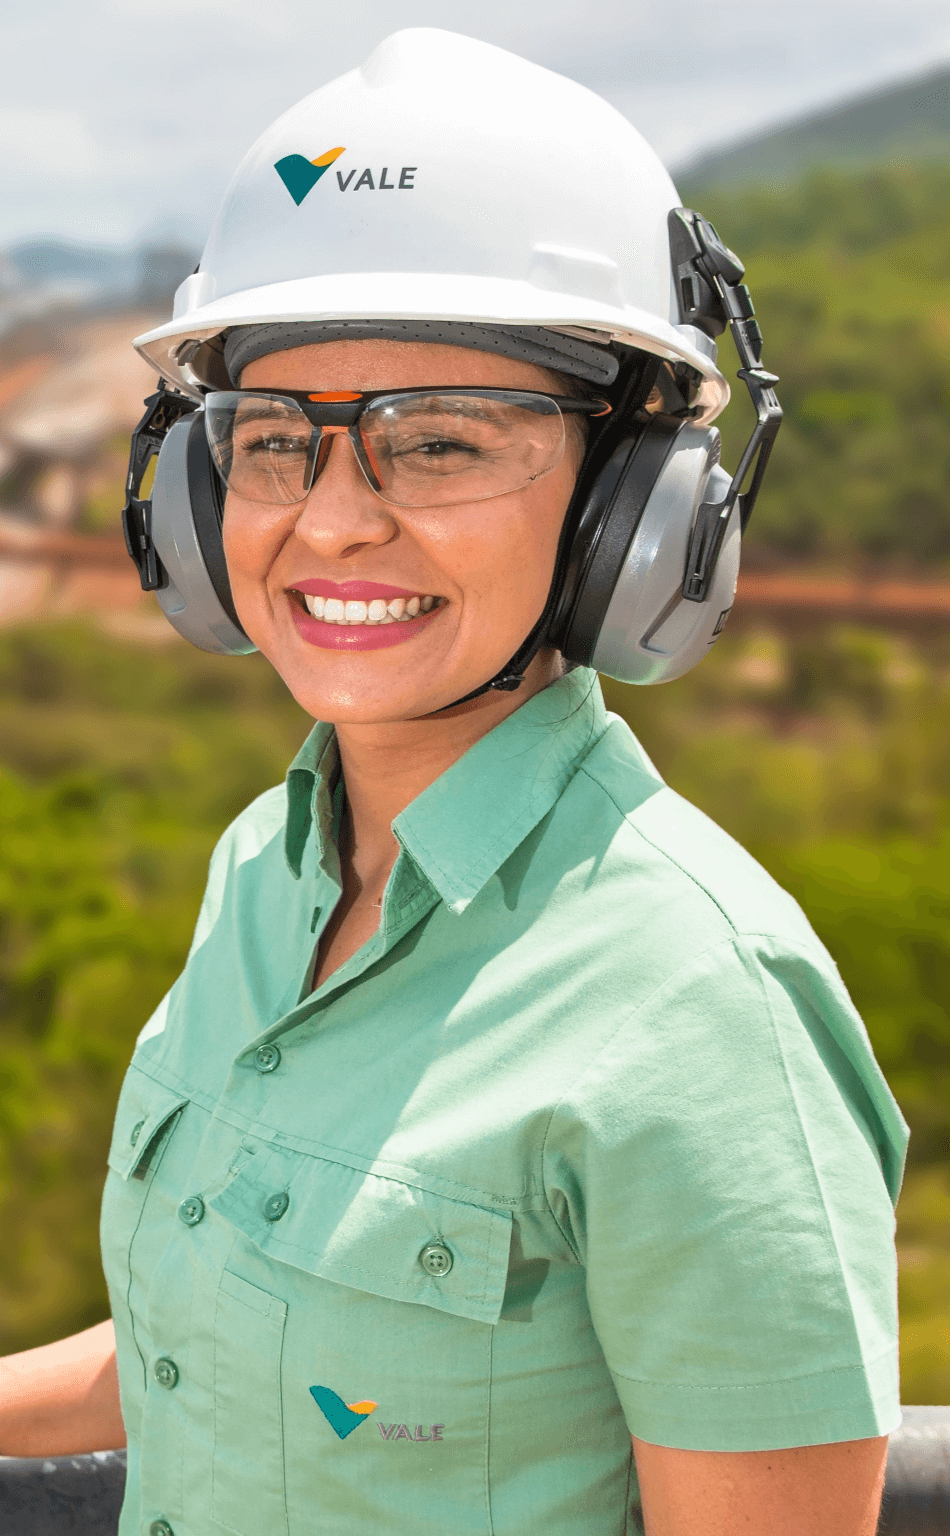 Vale employee smiling in green landscape. She is wearing a green Vale
uniform, goggles, helmet and ear plugs.